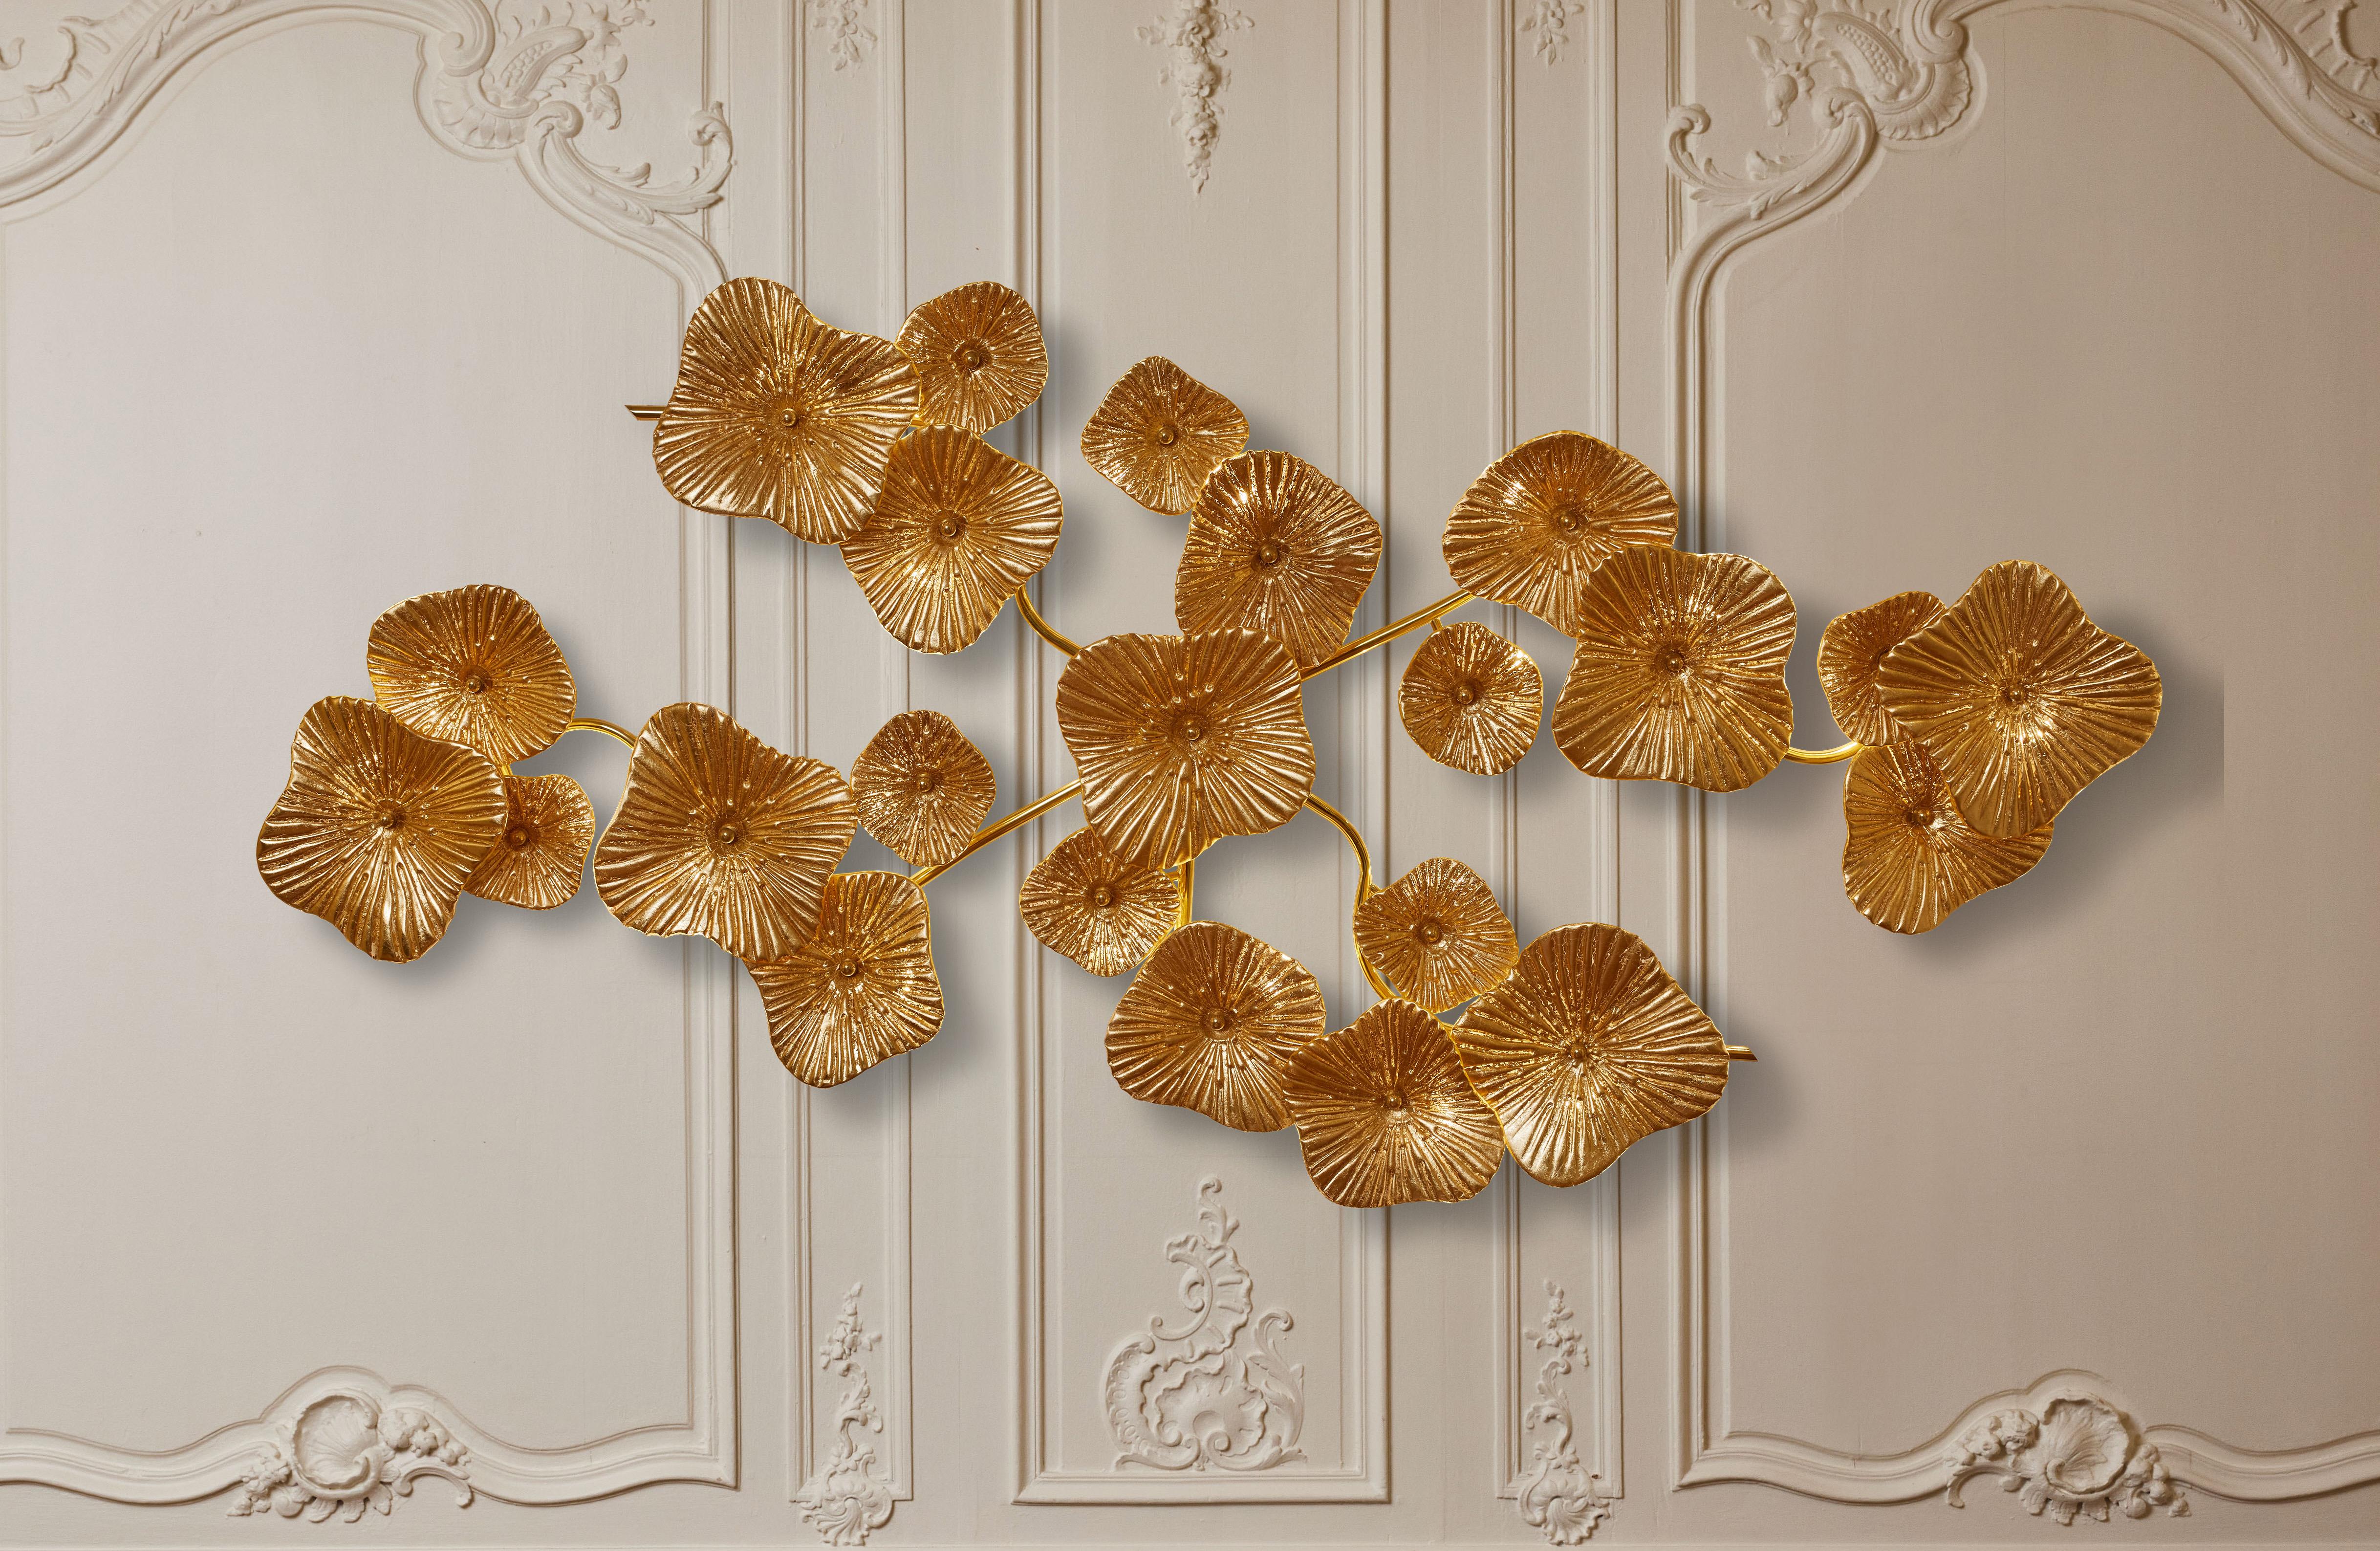 Long sconce in brass with flowers in gilt Murano glass with gold leaf.
Creation by Studio Glustin.
Italy, 2023.